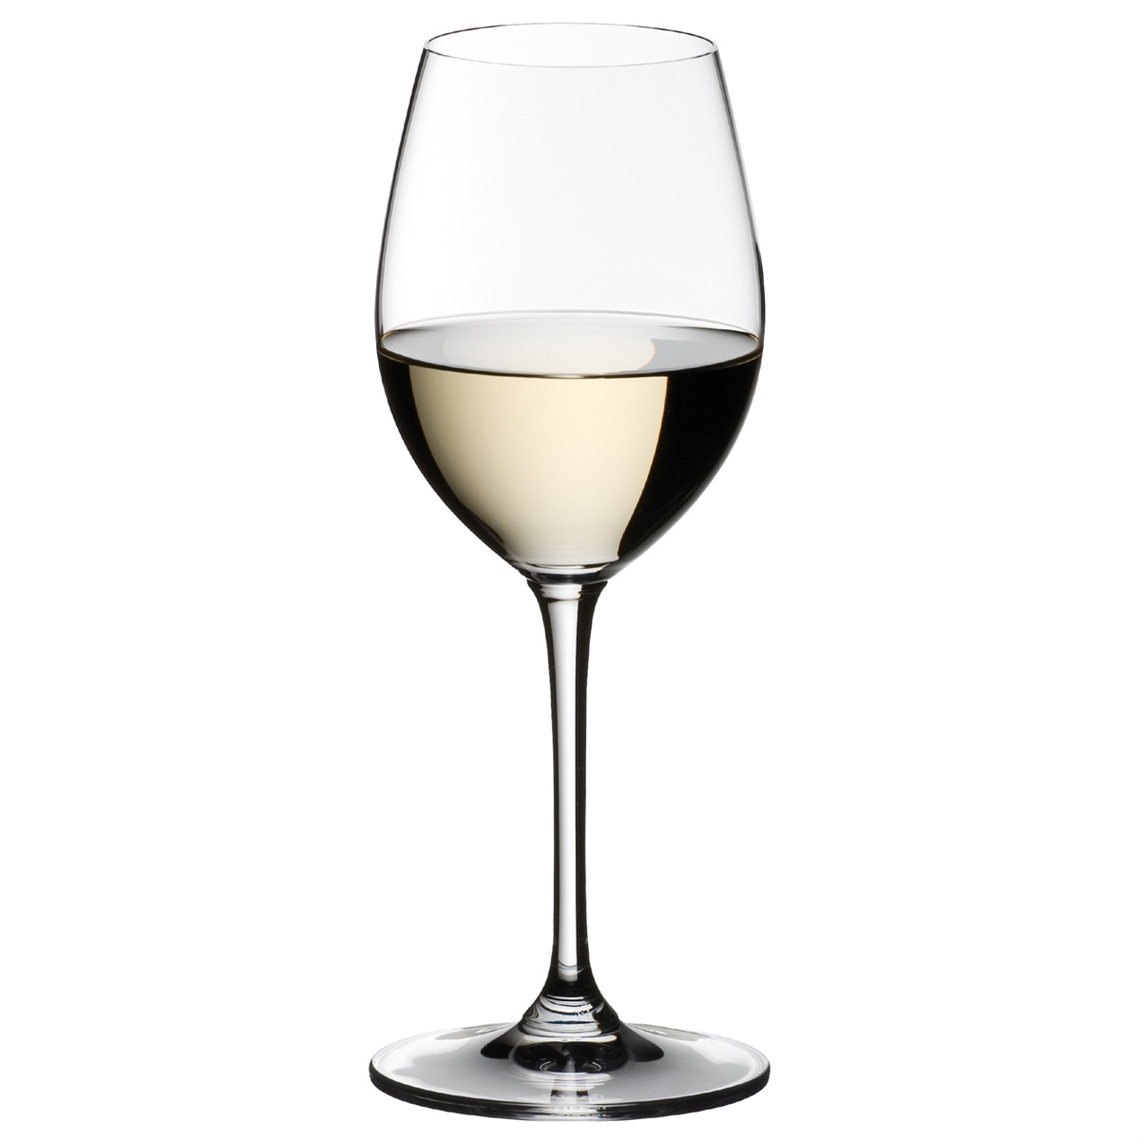 View more large wine glasses from our Dessert Wine Glasses range